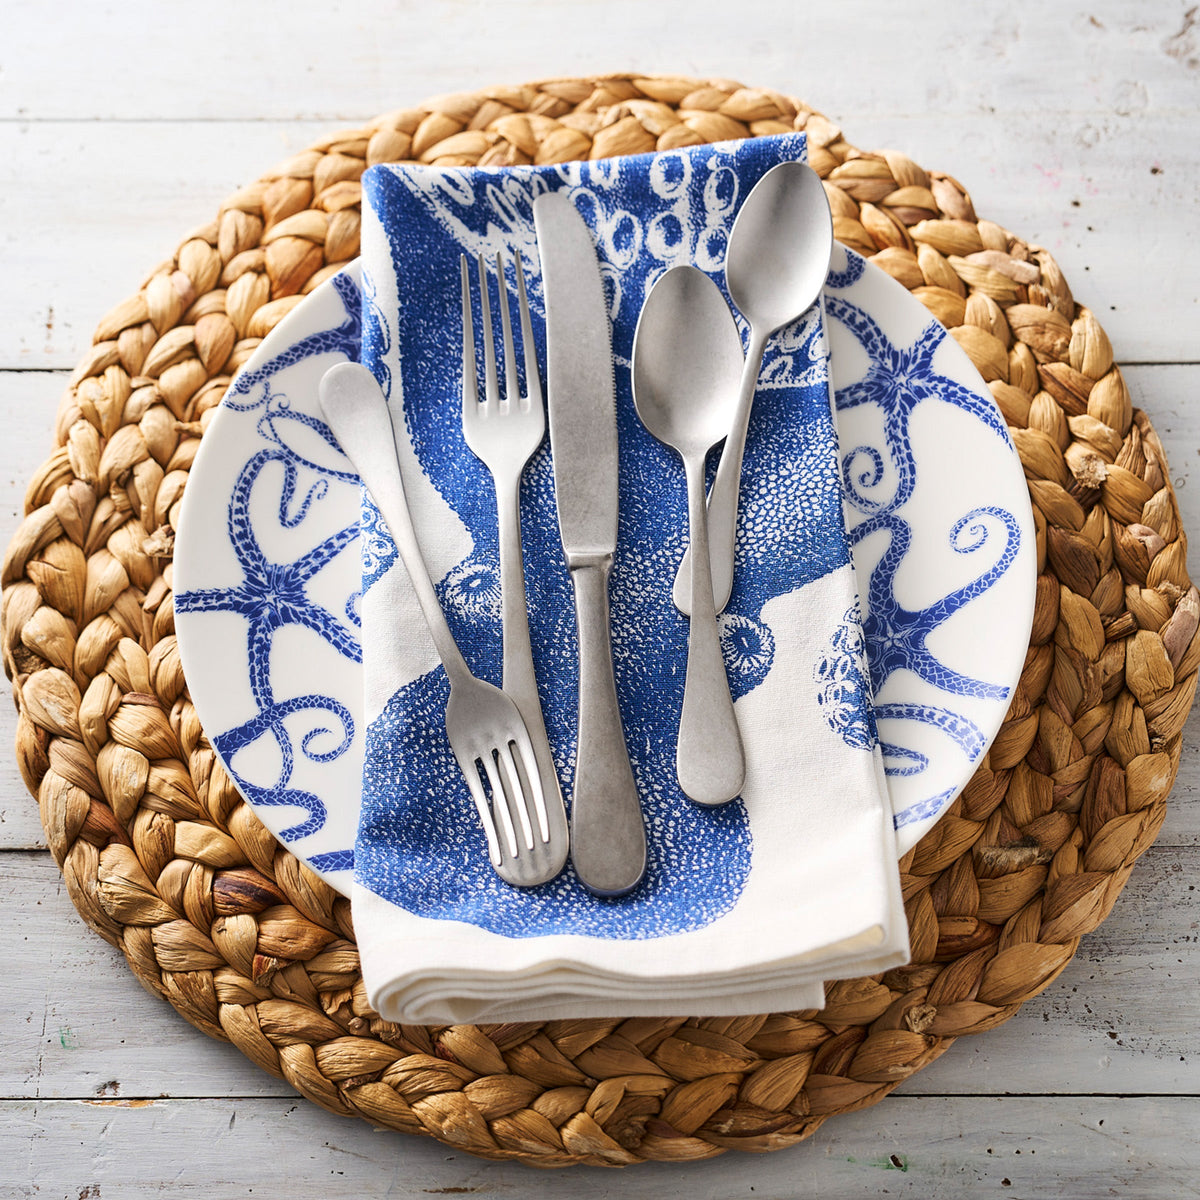 A timeless blue and white plate adorned with a Pewter 5-Piece Flatware Setting from the Mepra Pewter Collection.